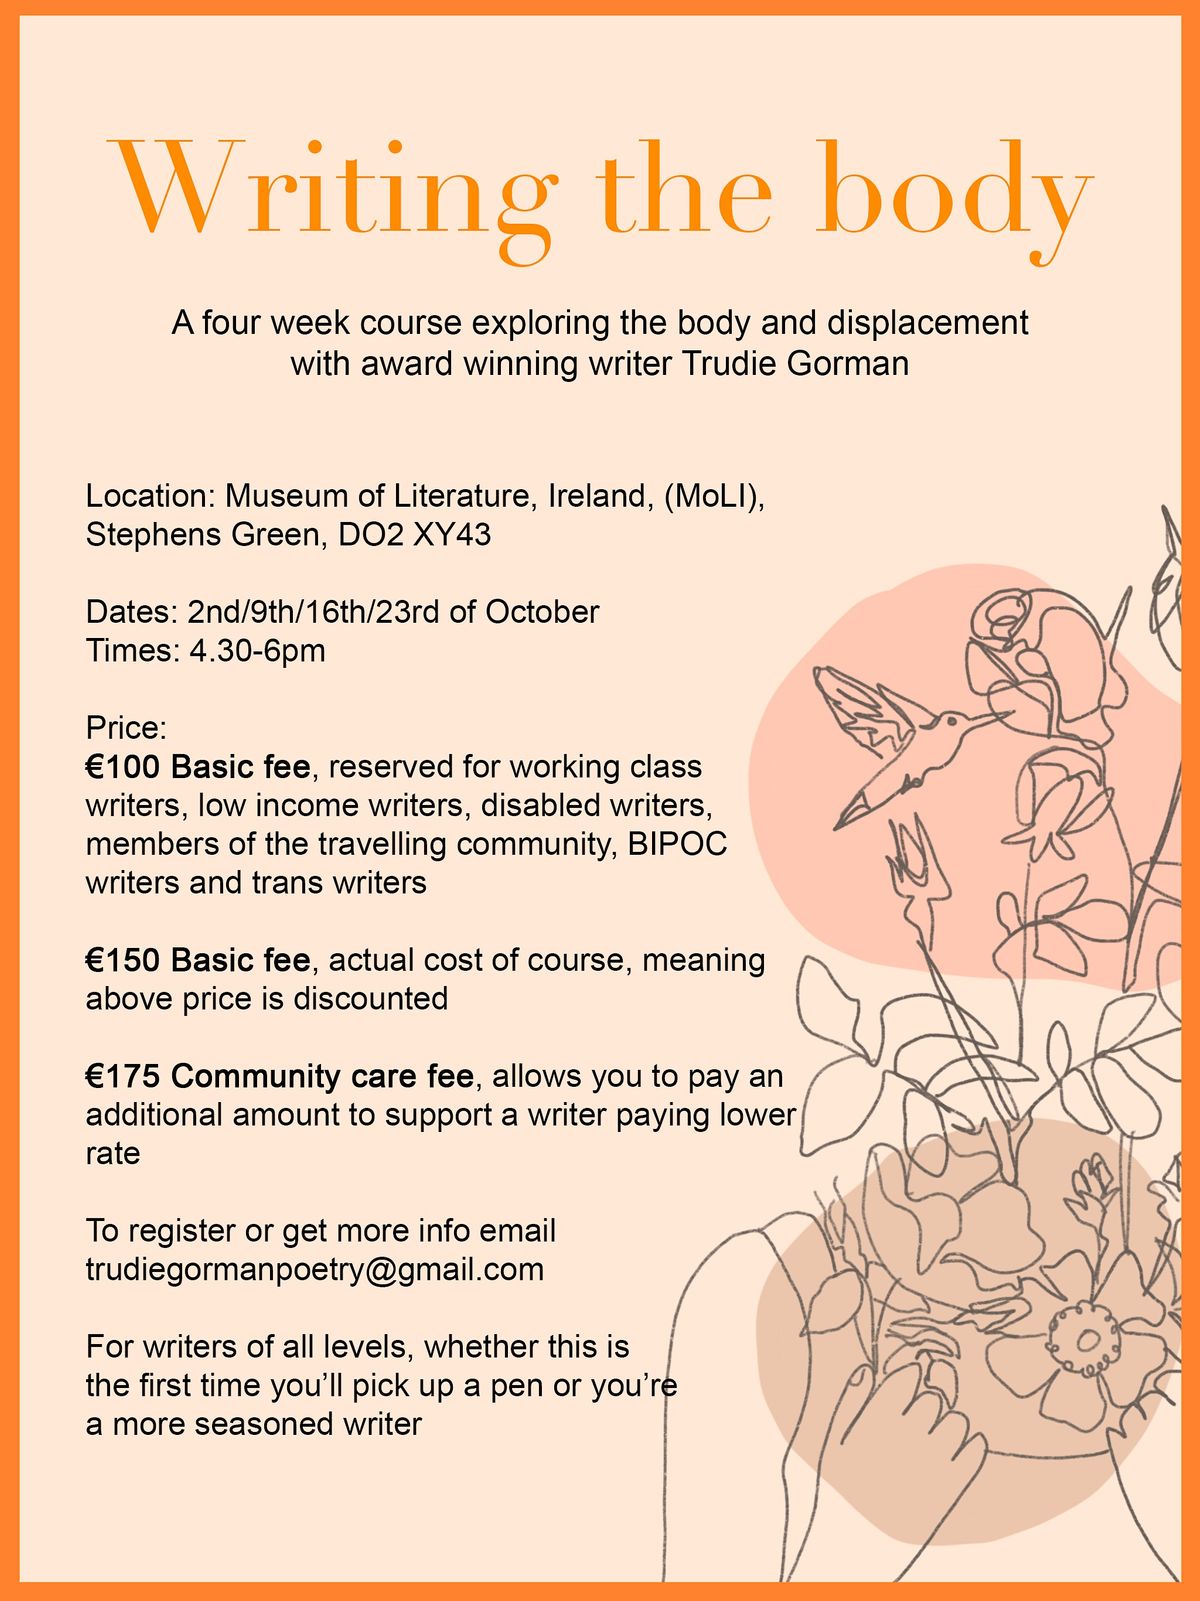 Writing the Body Writing Course at MoLI